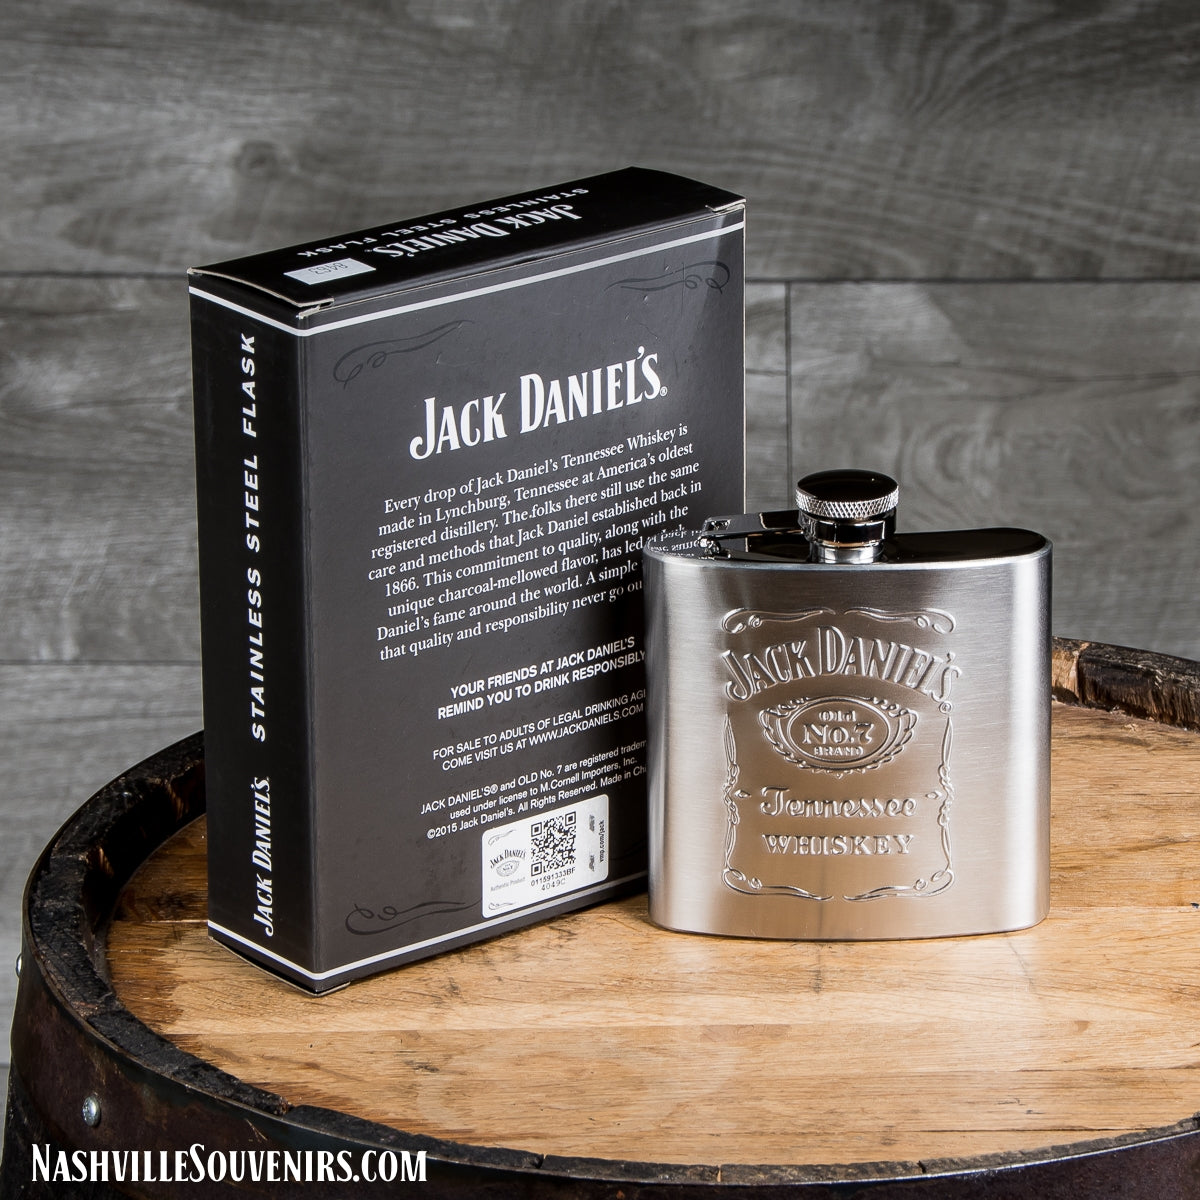 Officially licensed Jack Daniels Matte Label Logo Flask.  FREE SHIPPING on all US orders over $75!